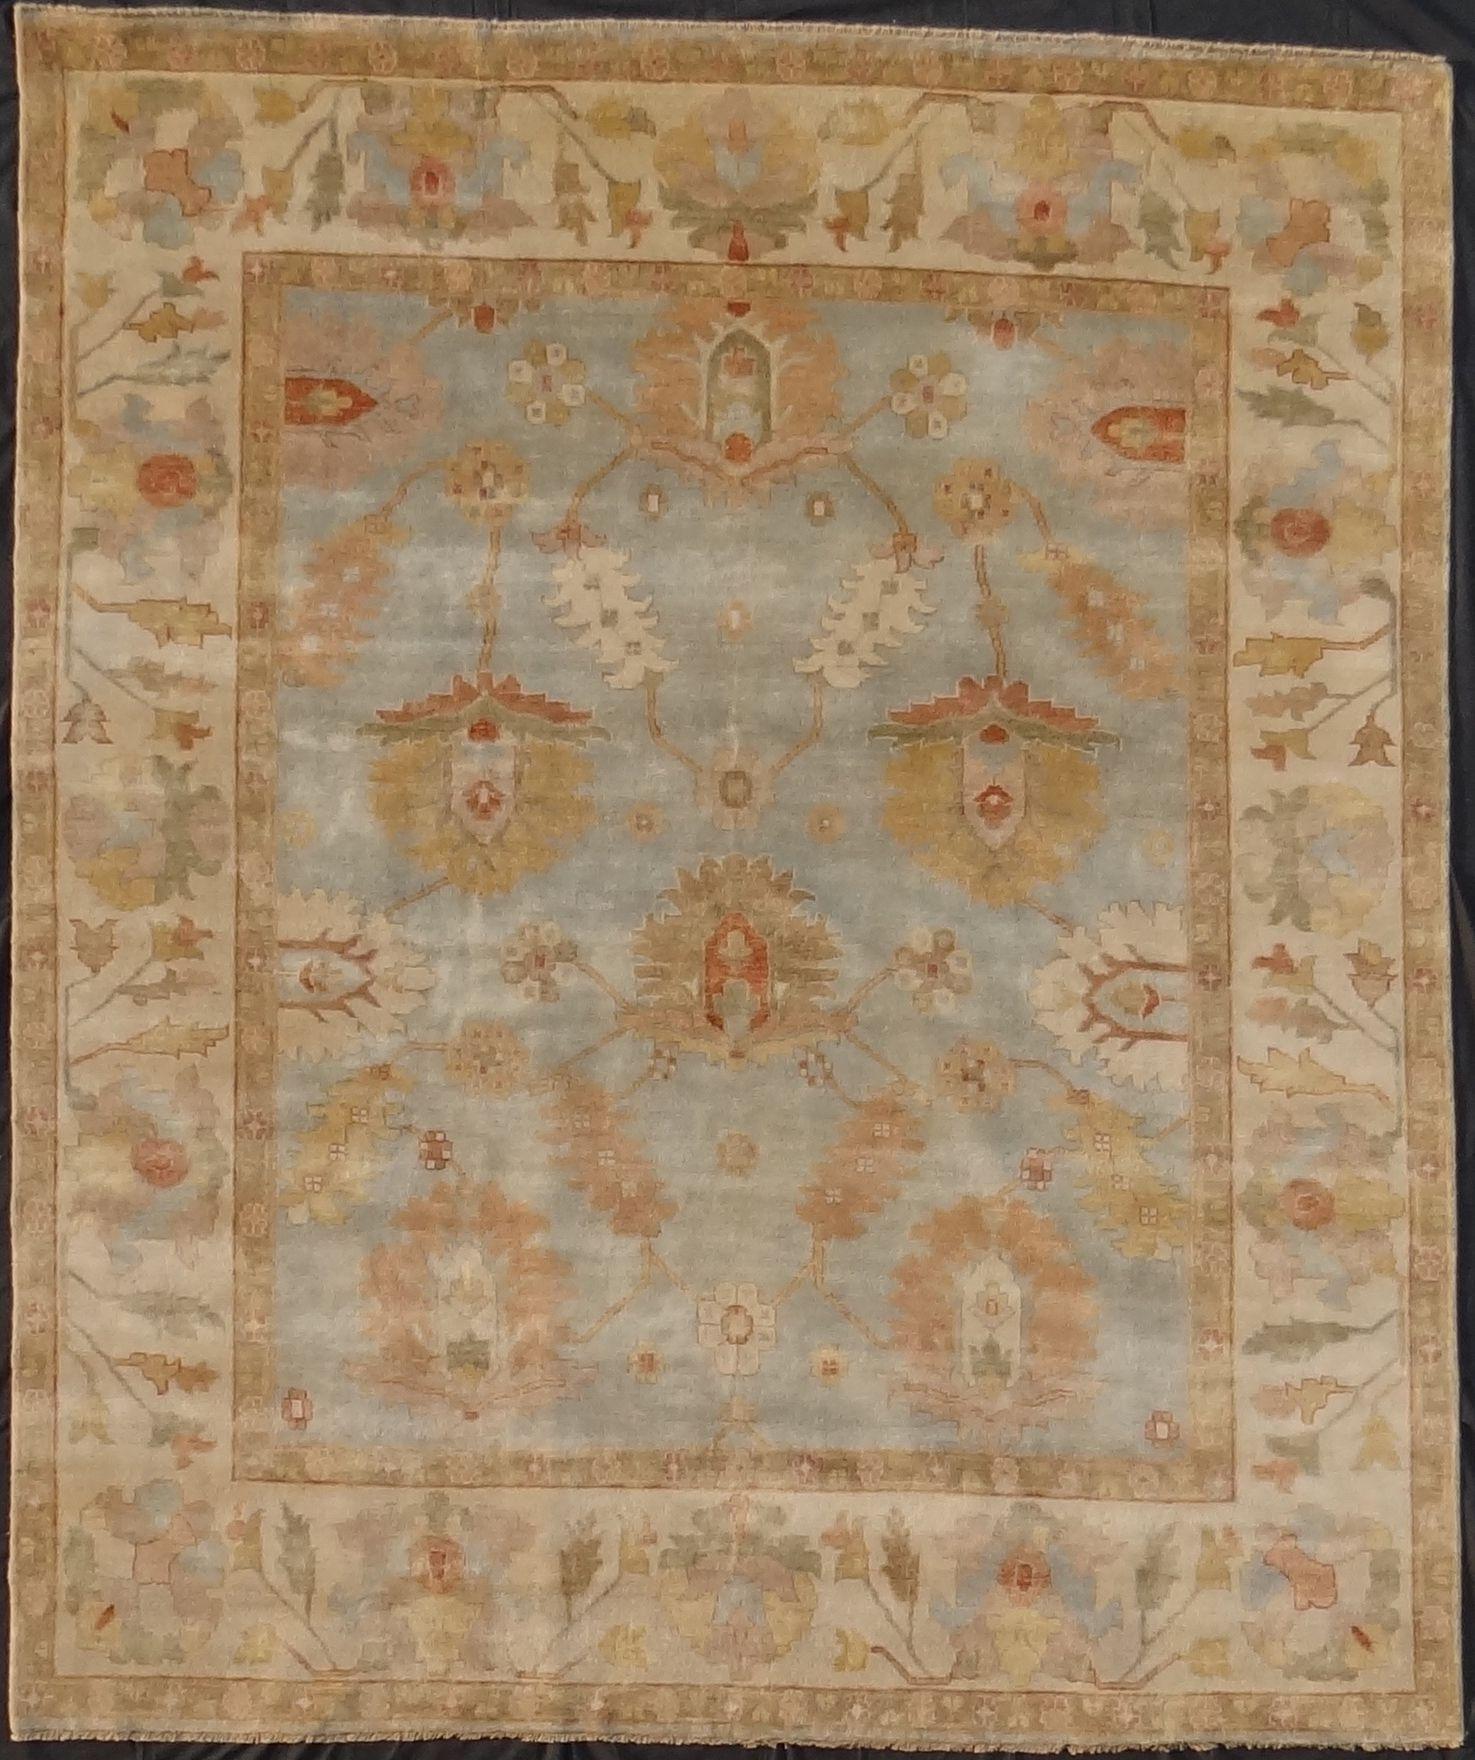 Nice new rug with beautiful Oushak design and nice colors, entirely hand knotted with wool velvet on cotton foundation.